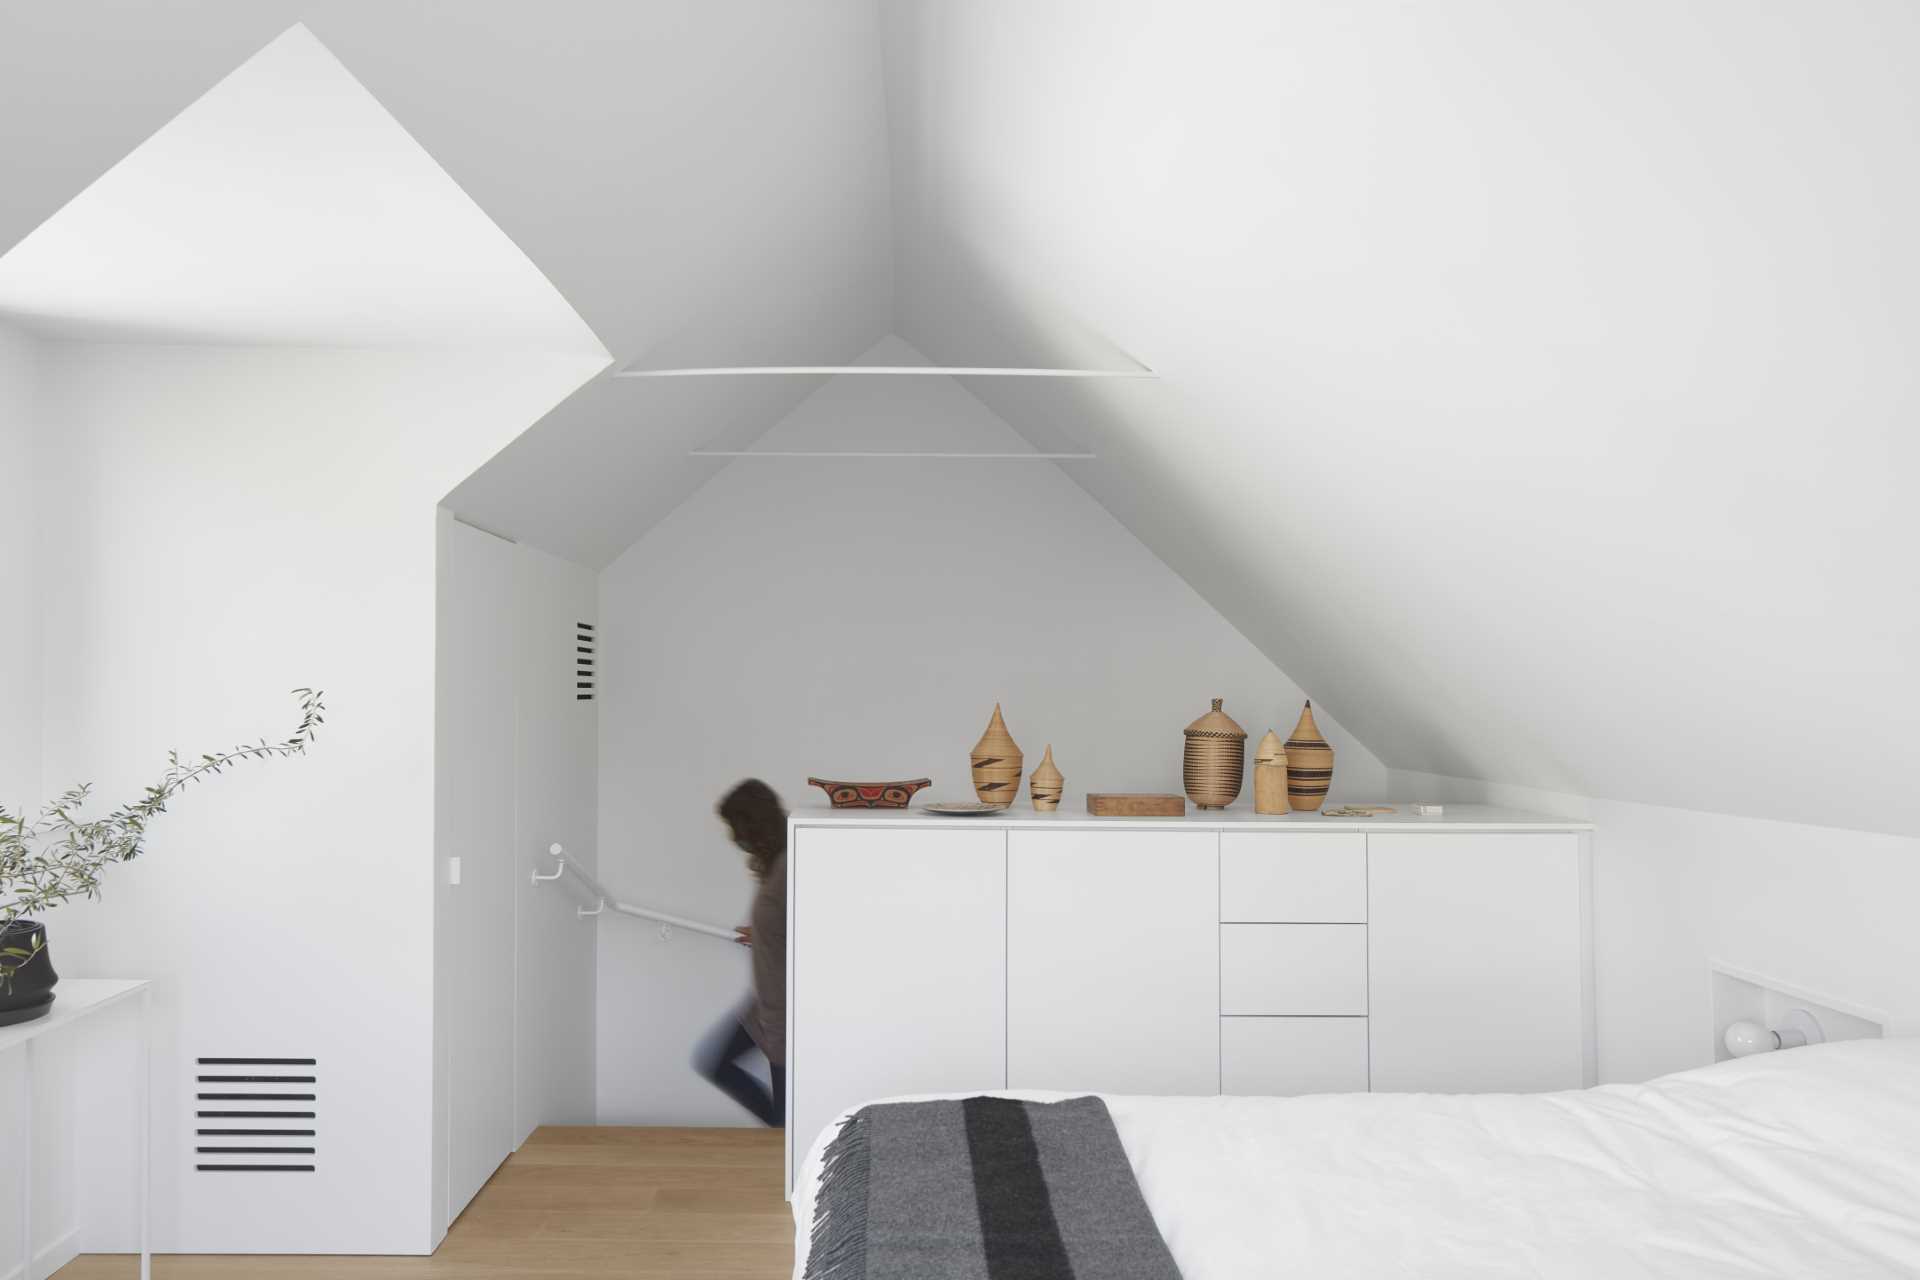 The bedroom of a small laneway house includes a closet and a dresser.